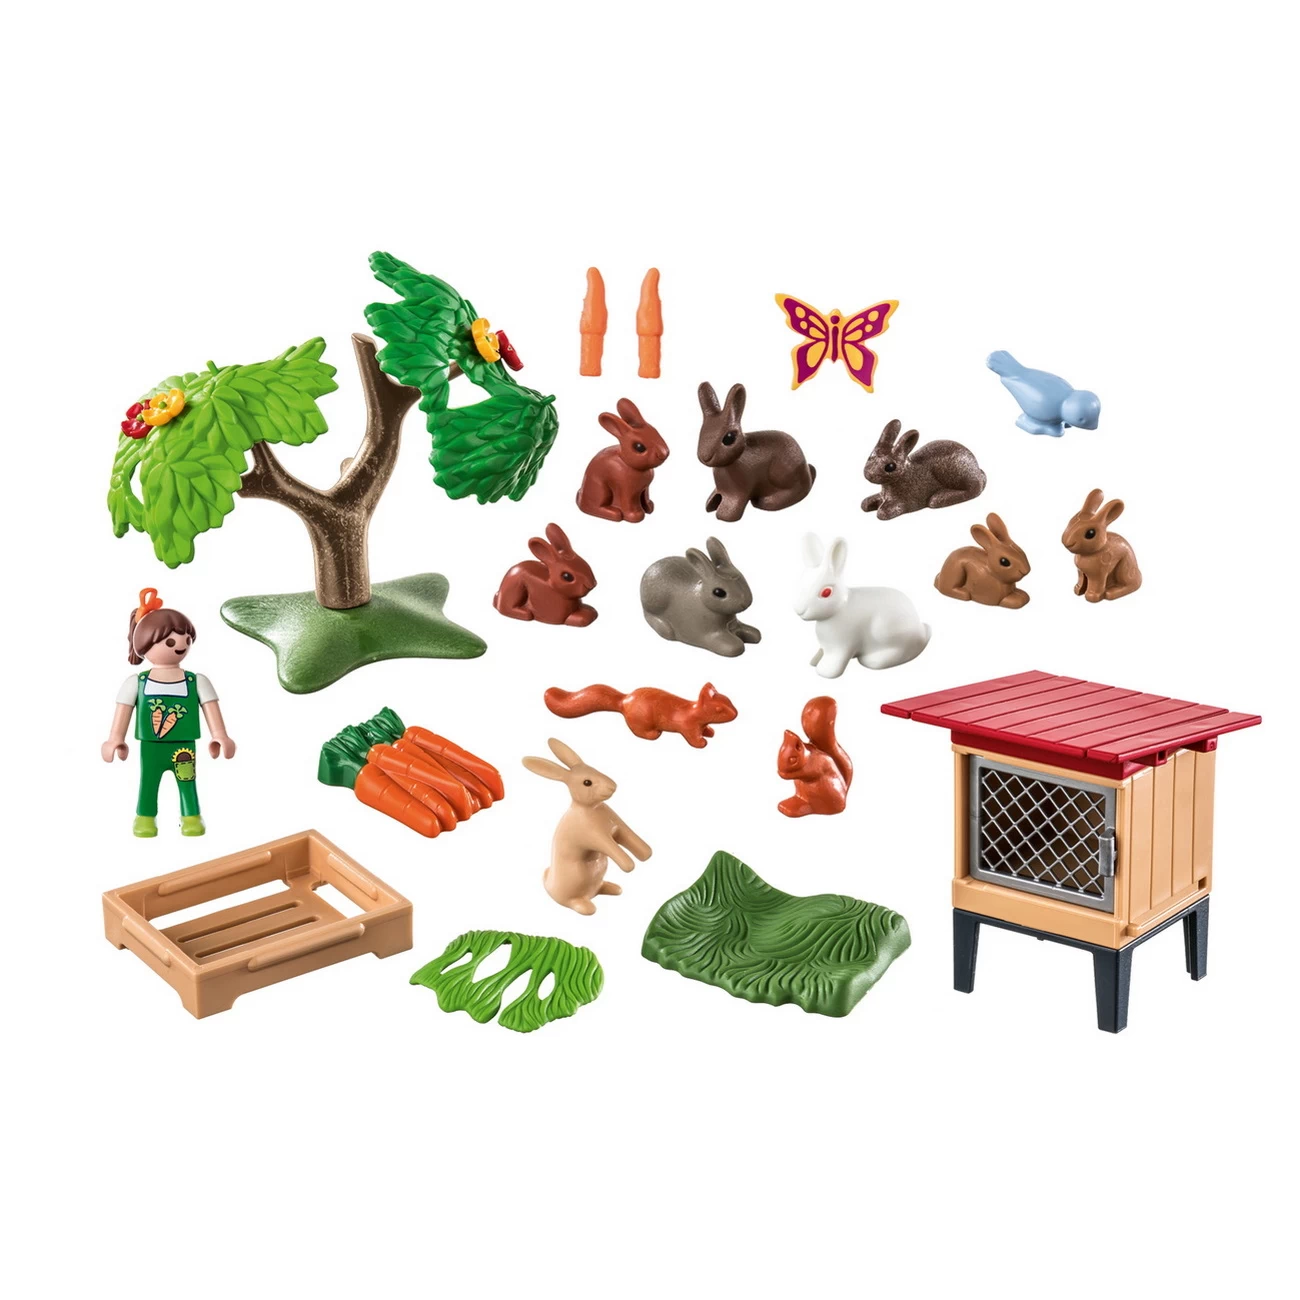 Playmobil 71252 - Kaninchenstall (Country)